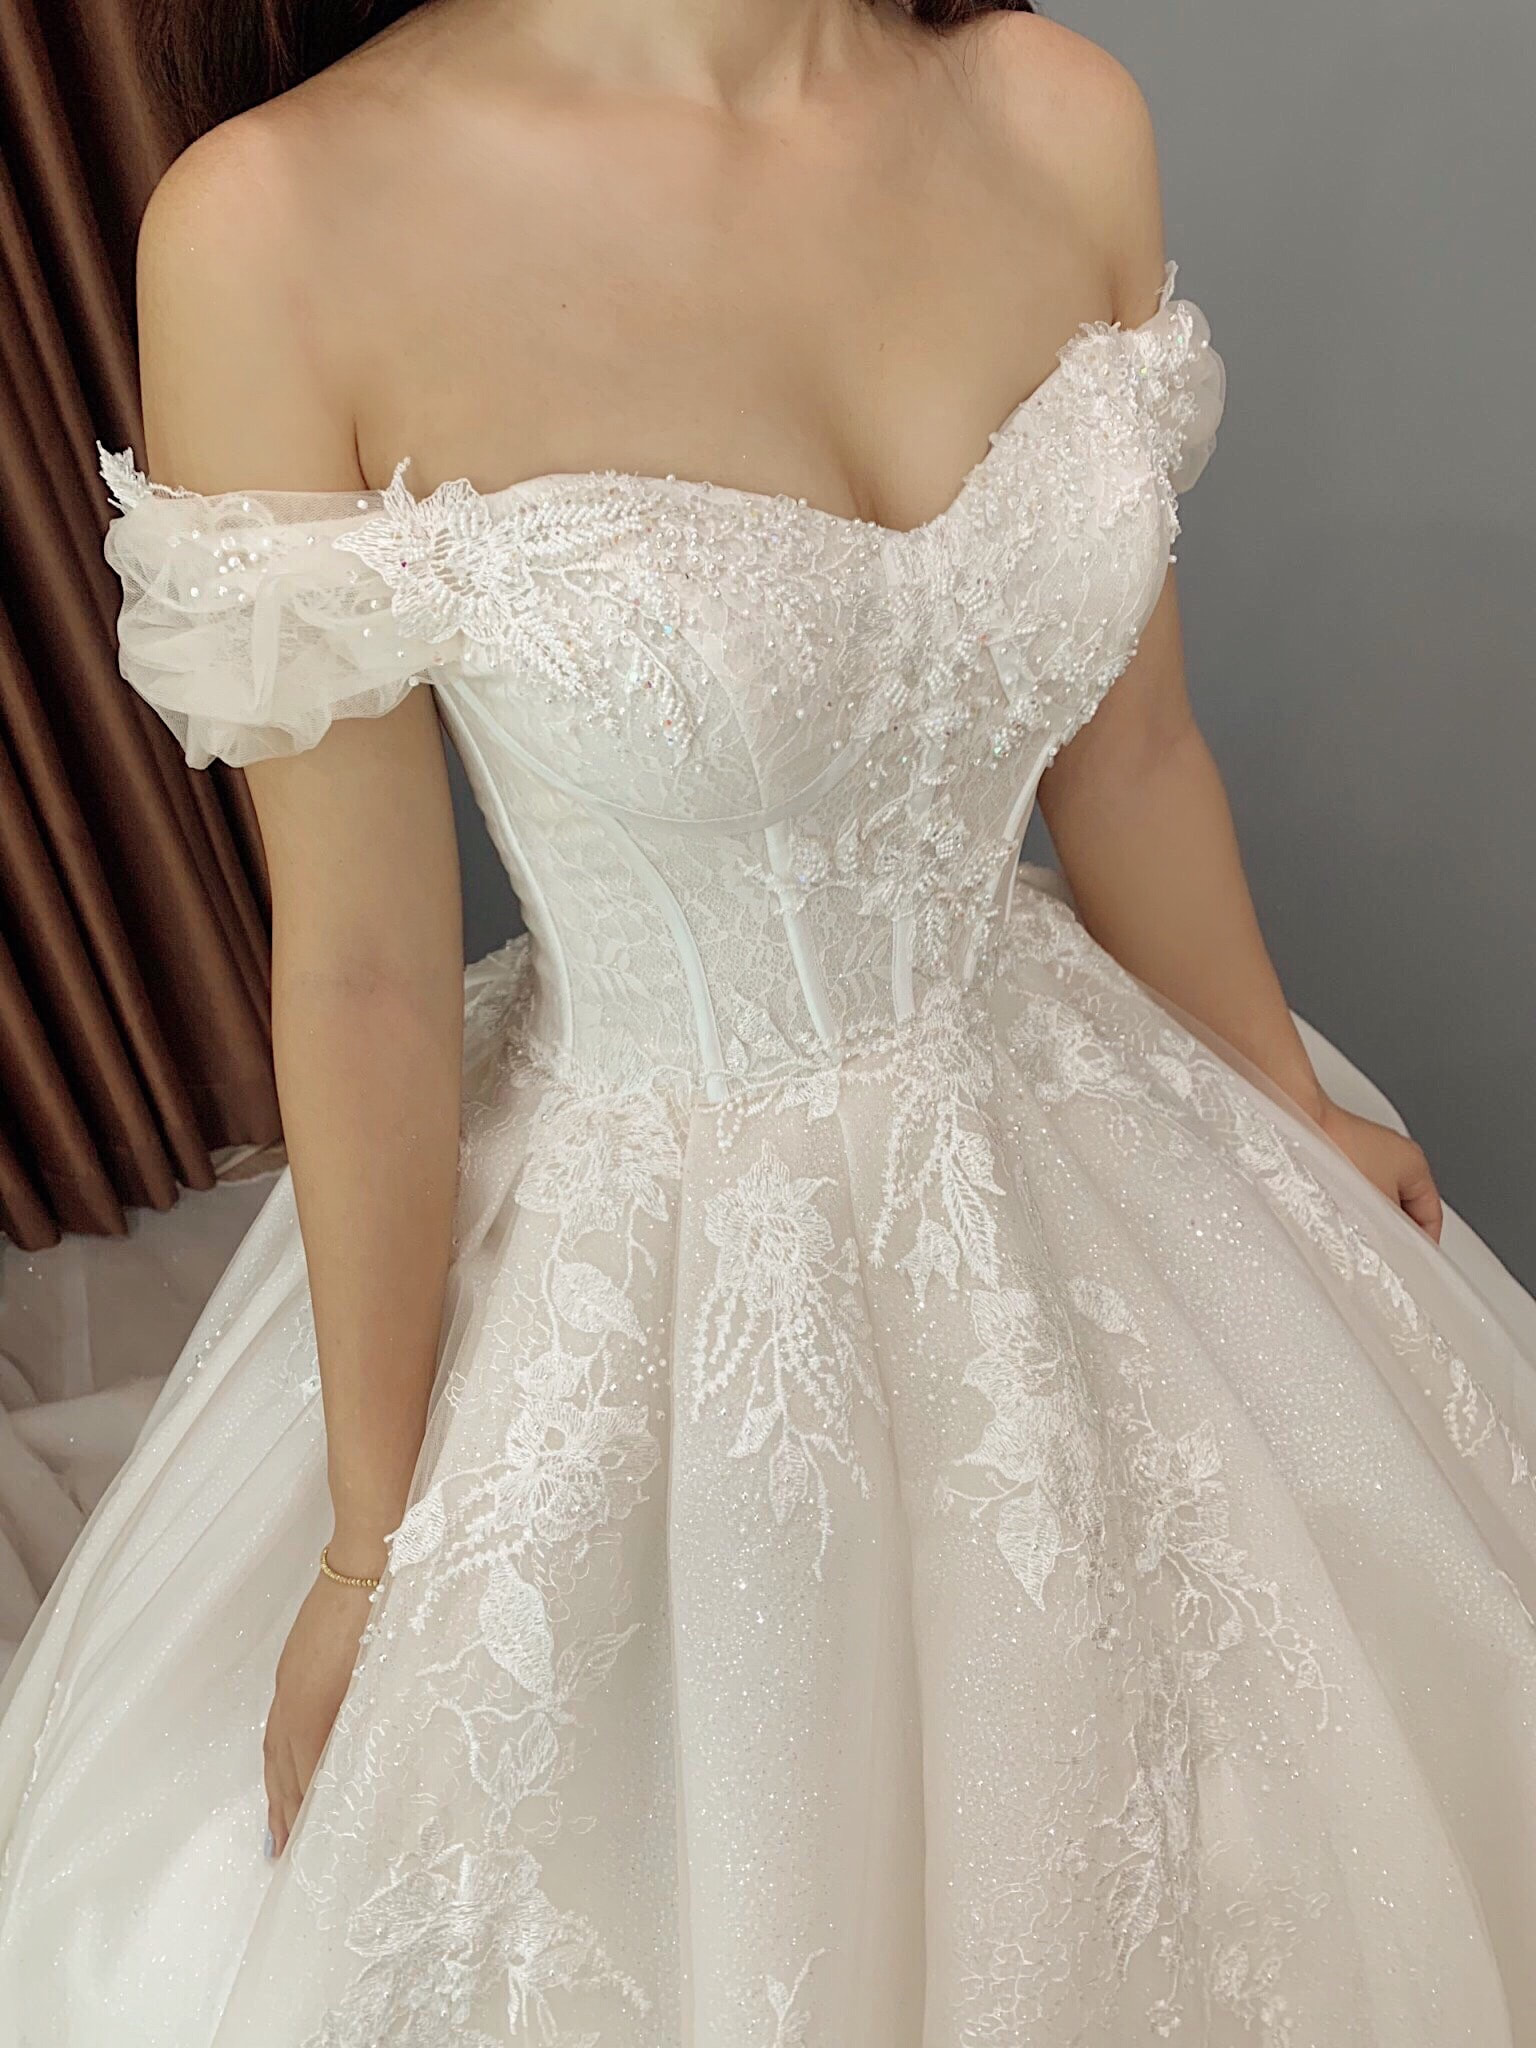 Corset Top Wedding Dresses Top 10 Corset Top Wedding Dresses Find The Perfect Venue For Your 1198